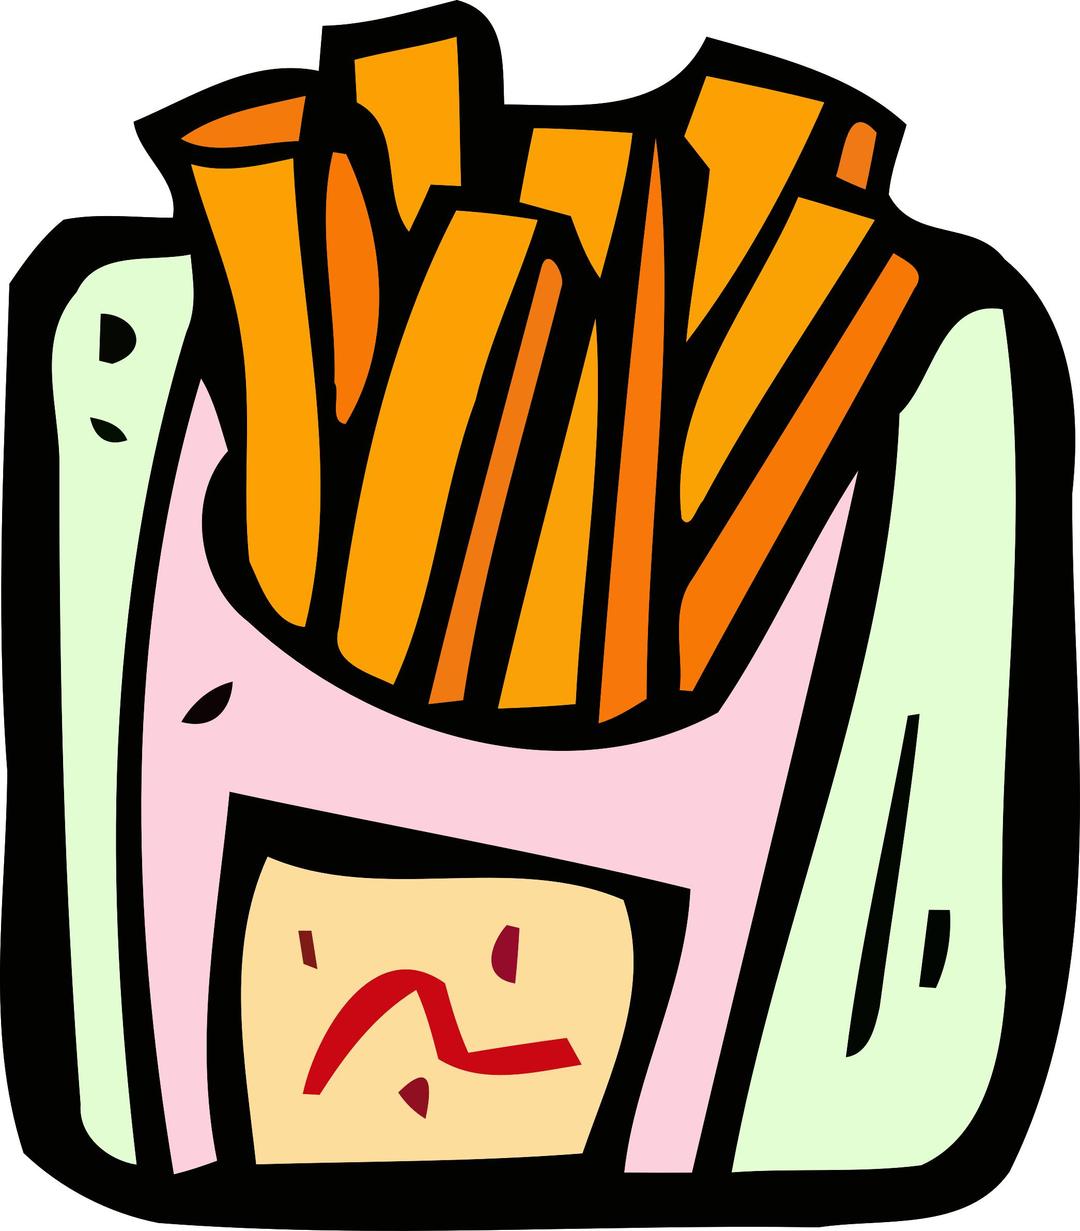 Food and drink icon - fries png transparent